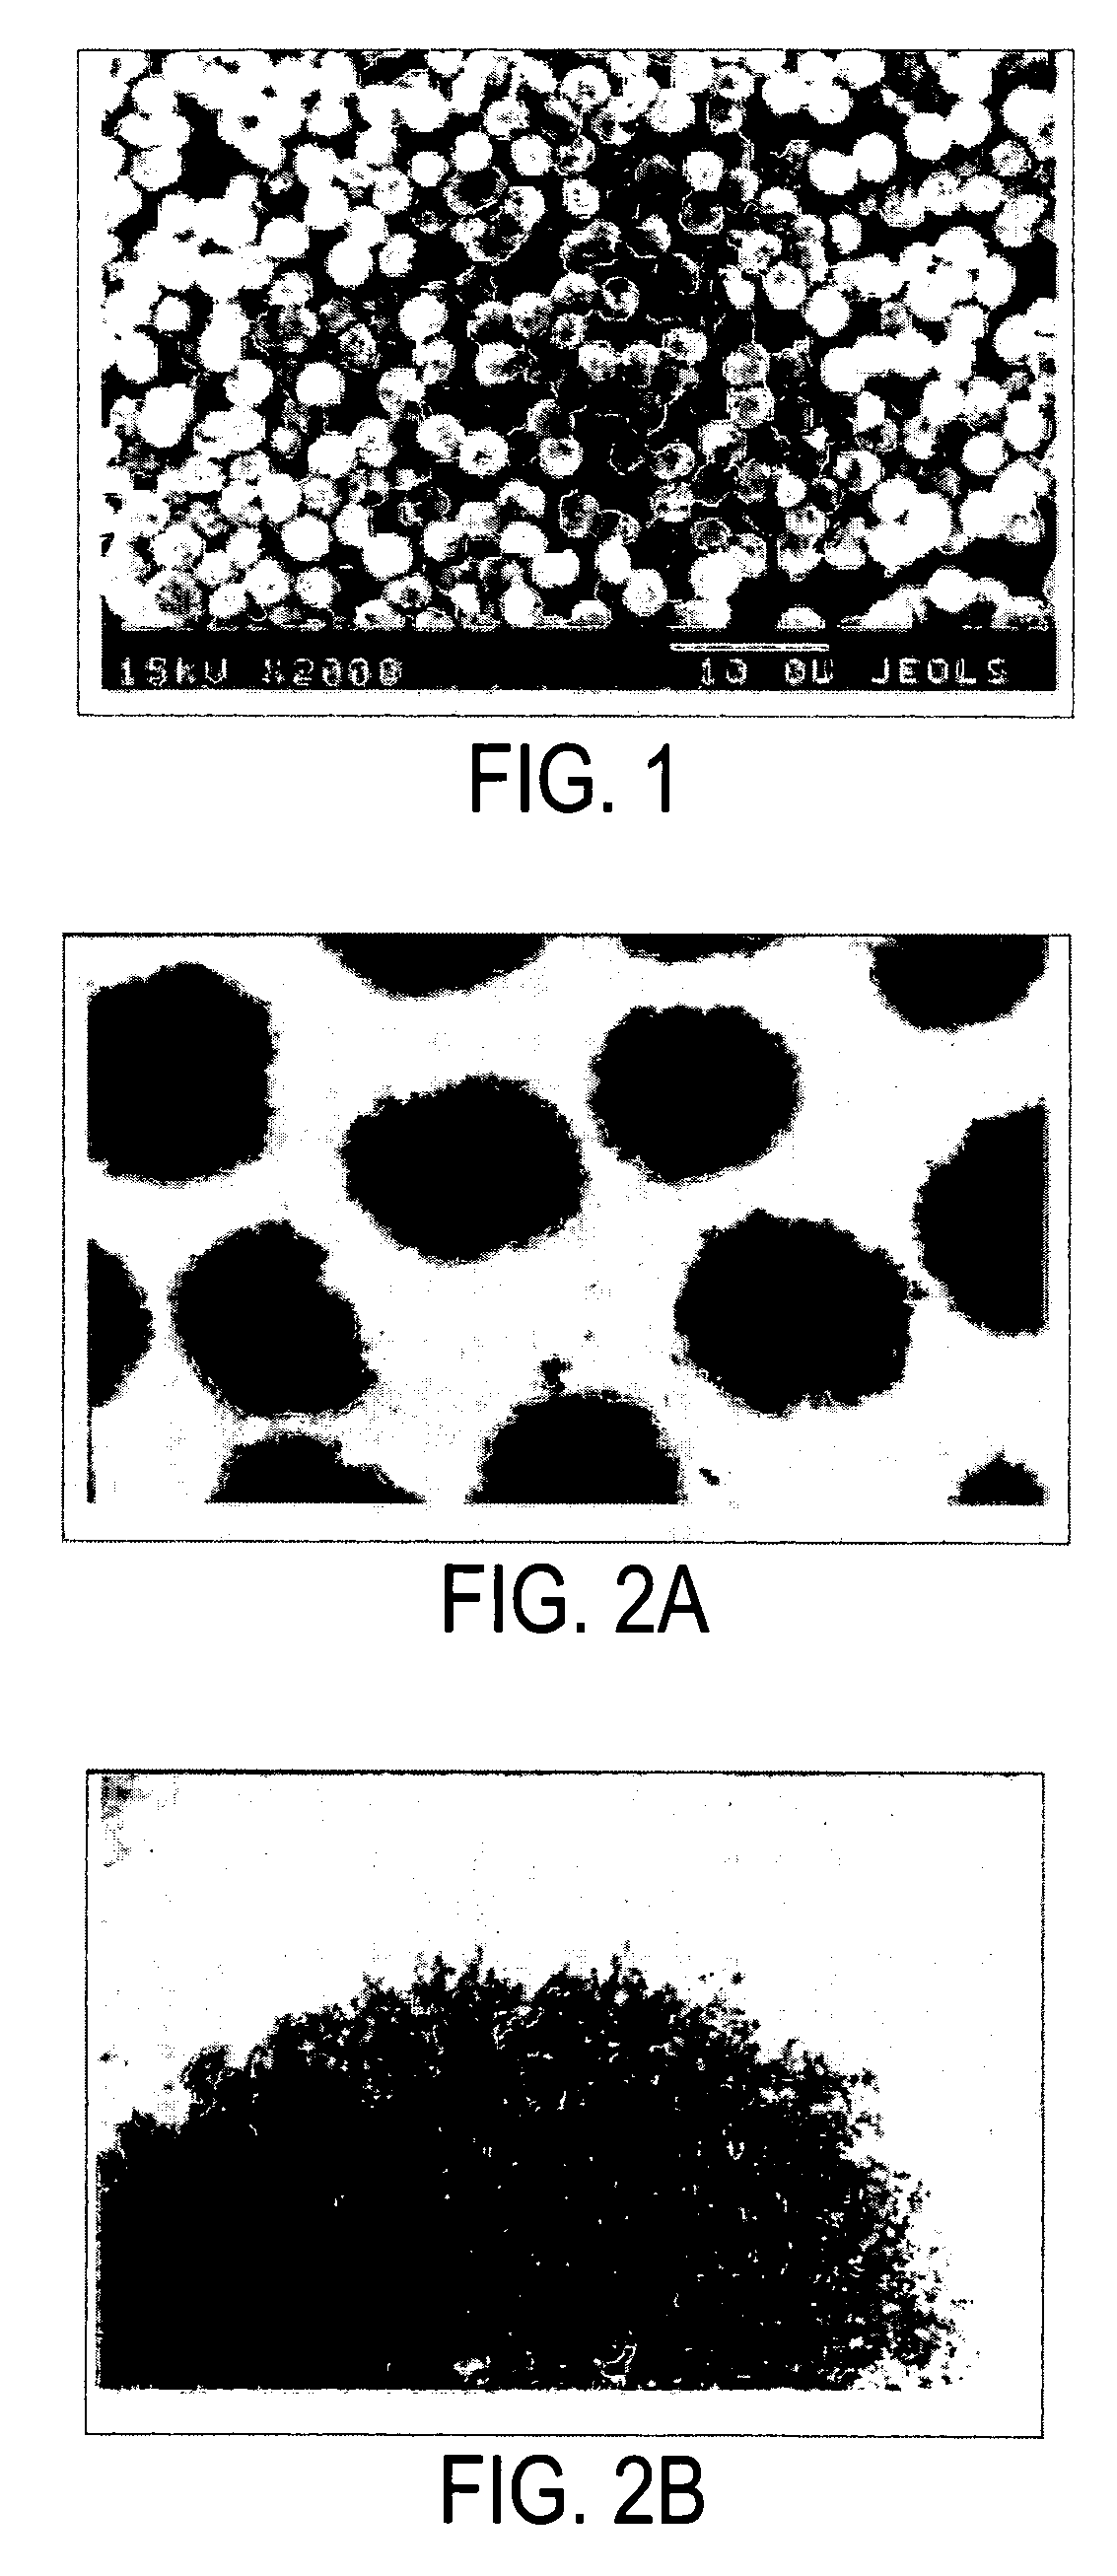 Long acting injectable insulin composition and methods of making and using thereof